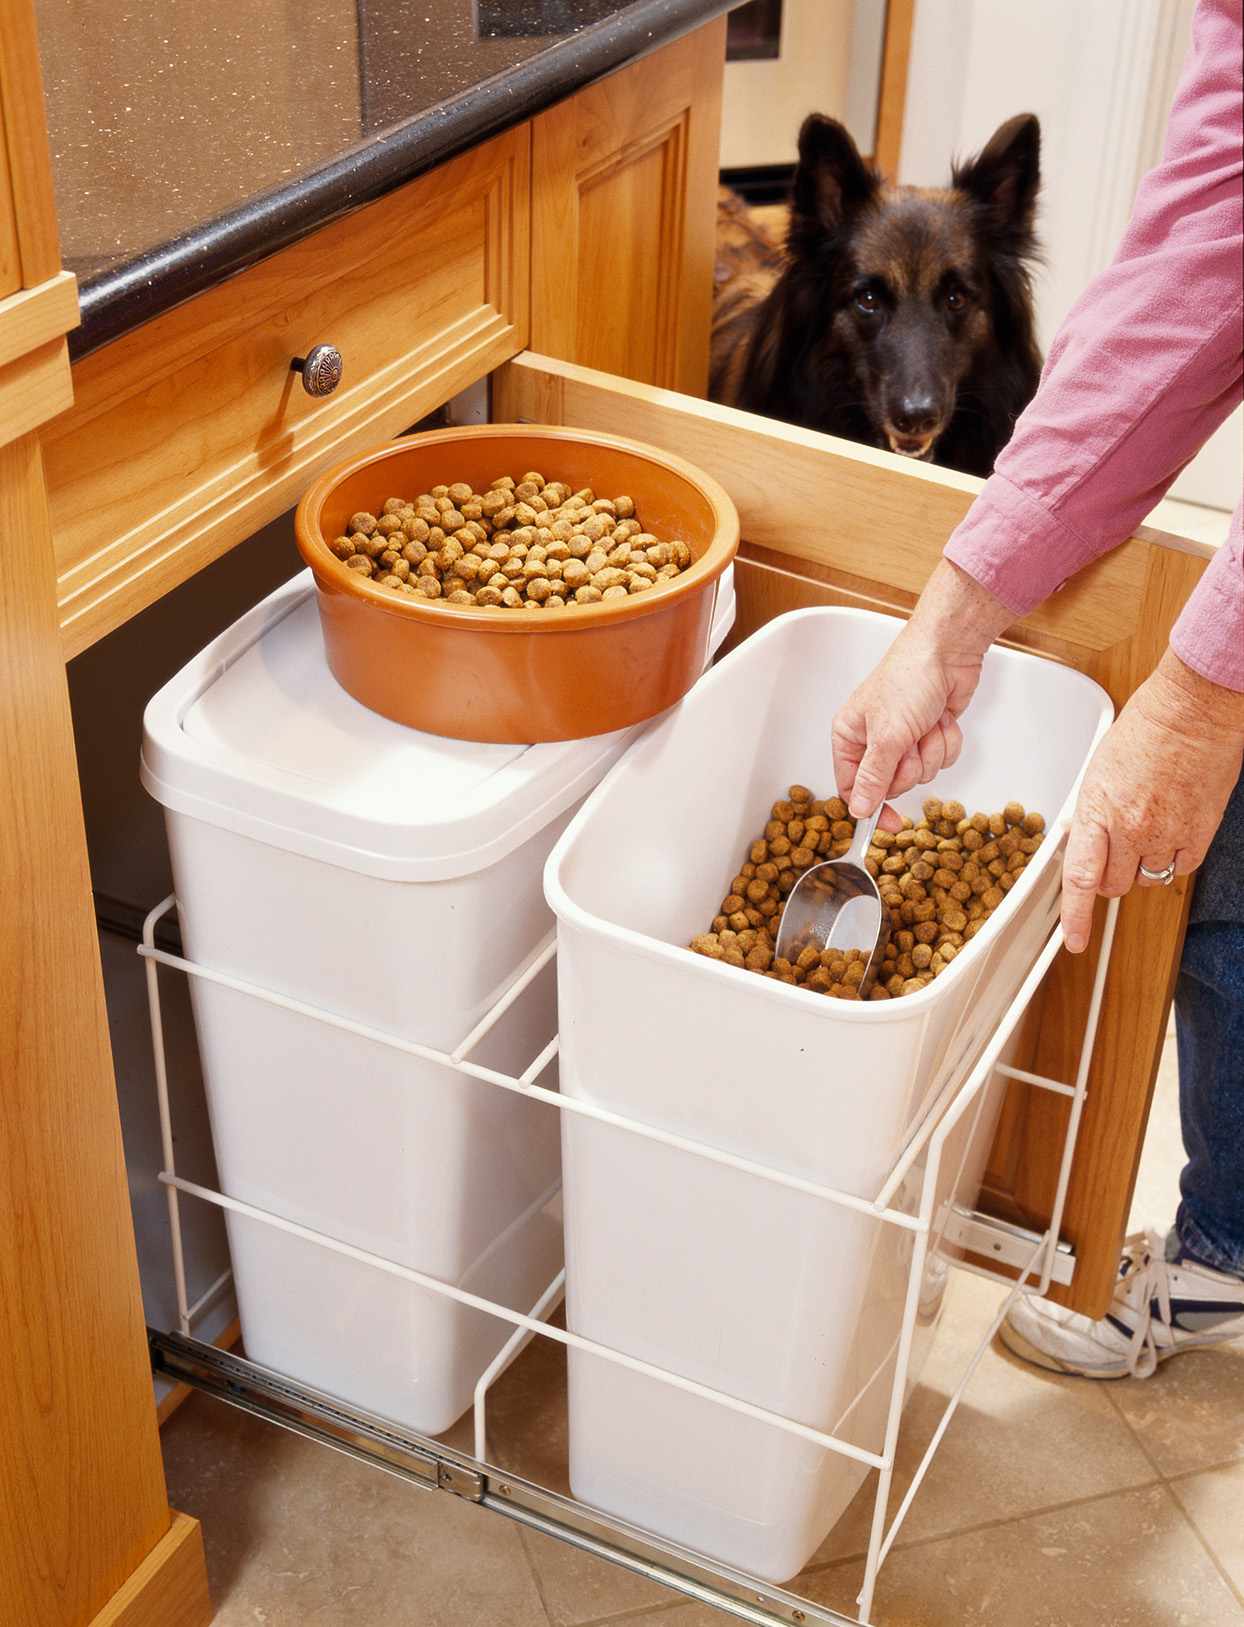 Pull-out storage bins